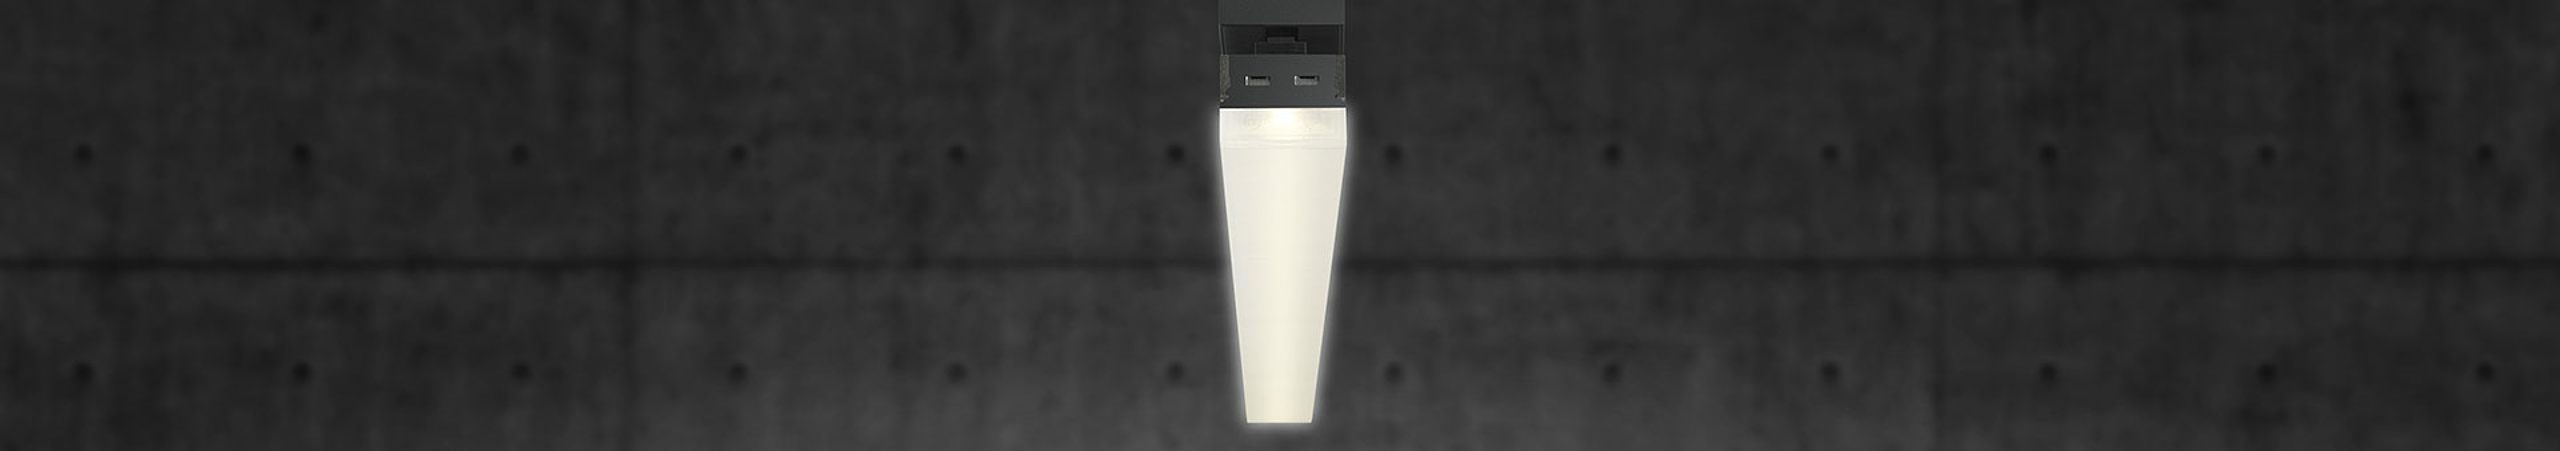 LED luminaire light line 20.2 now available in LED black Luxsystem